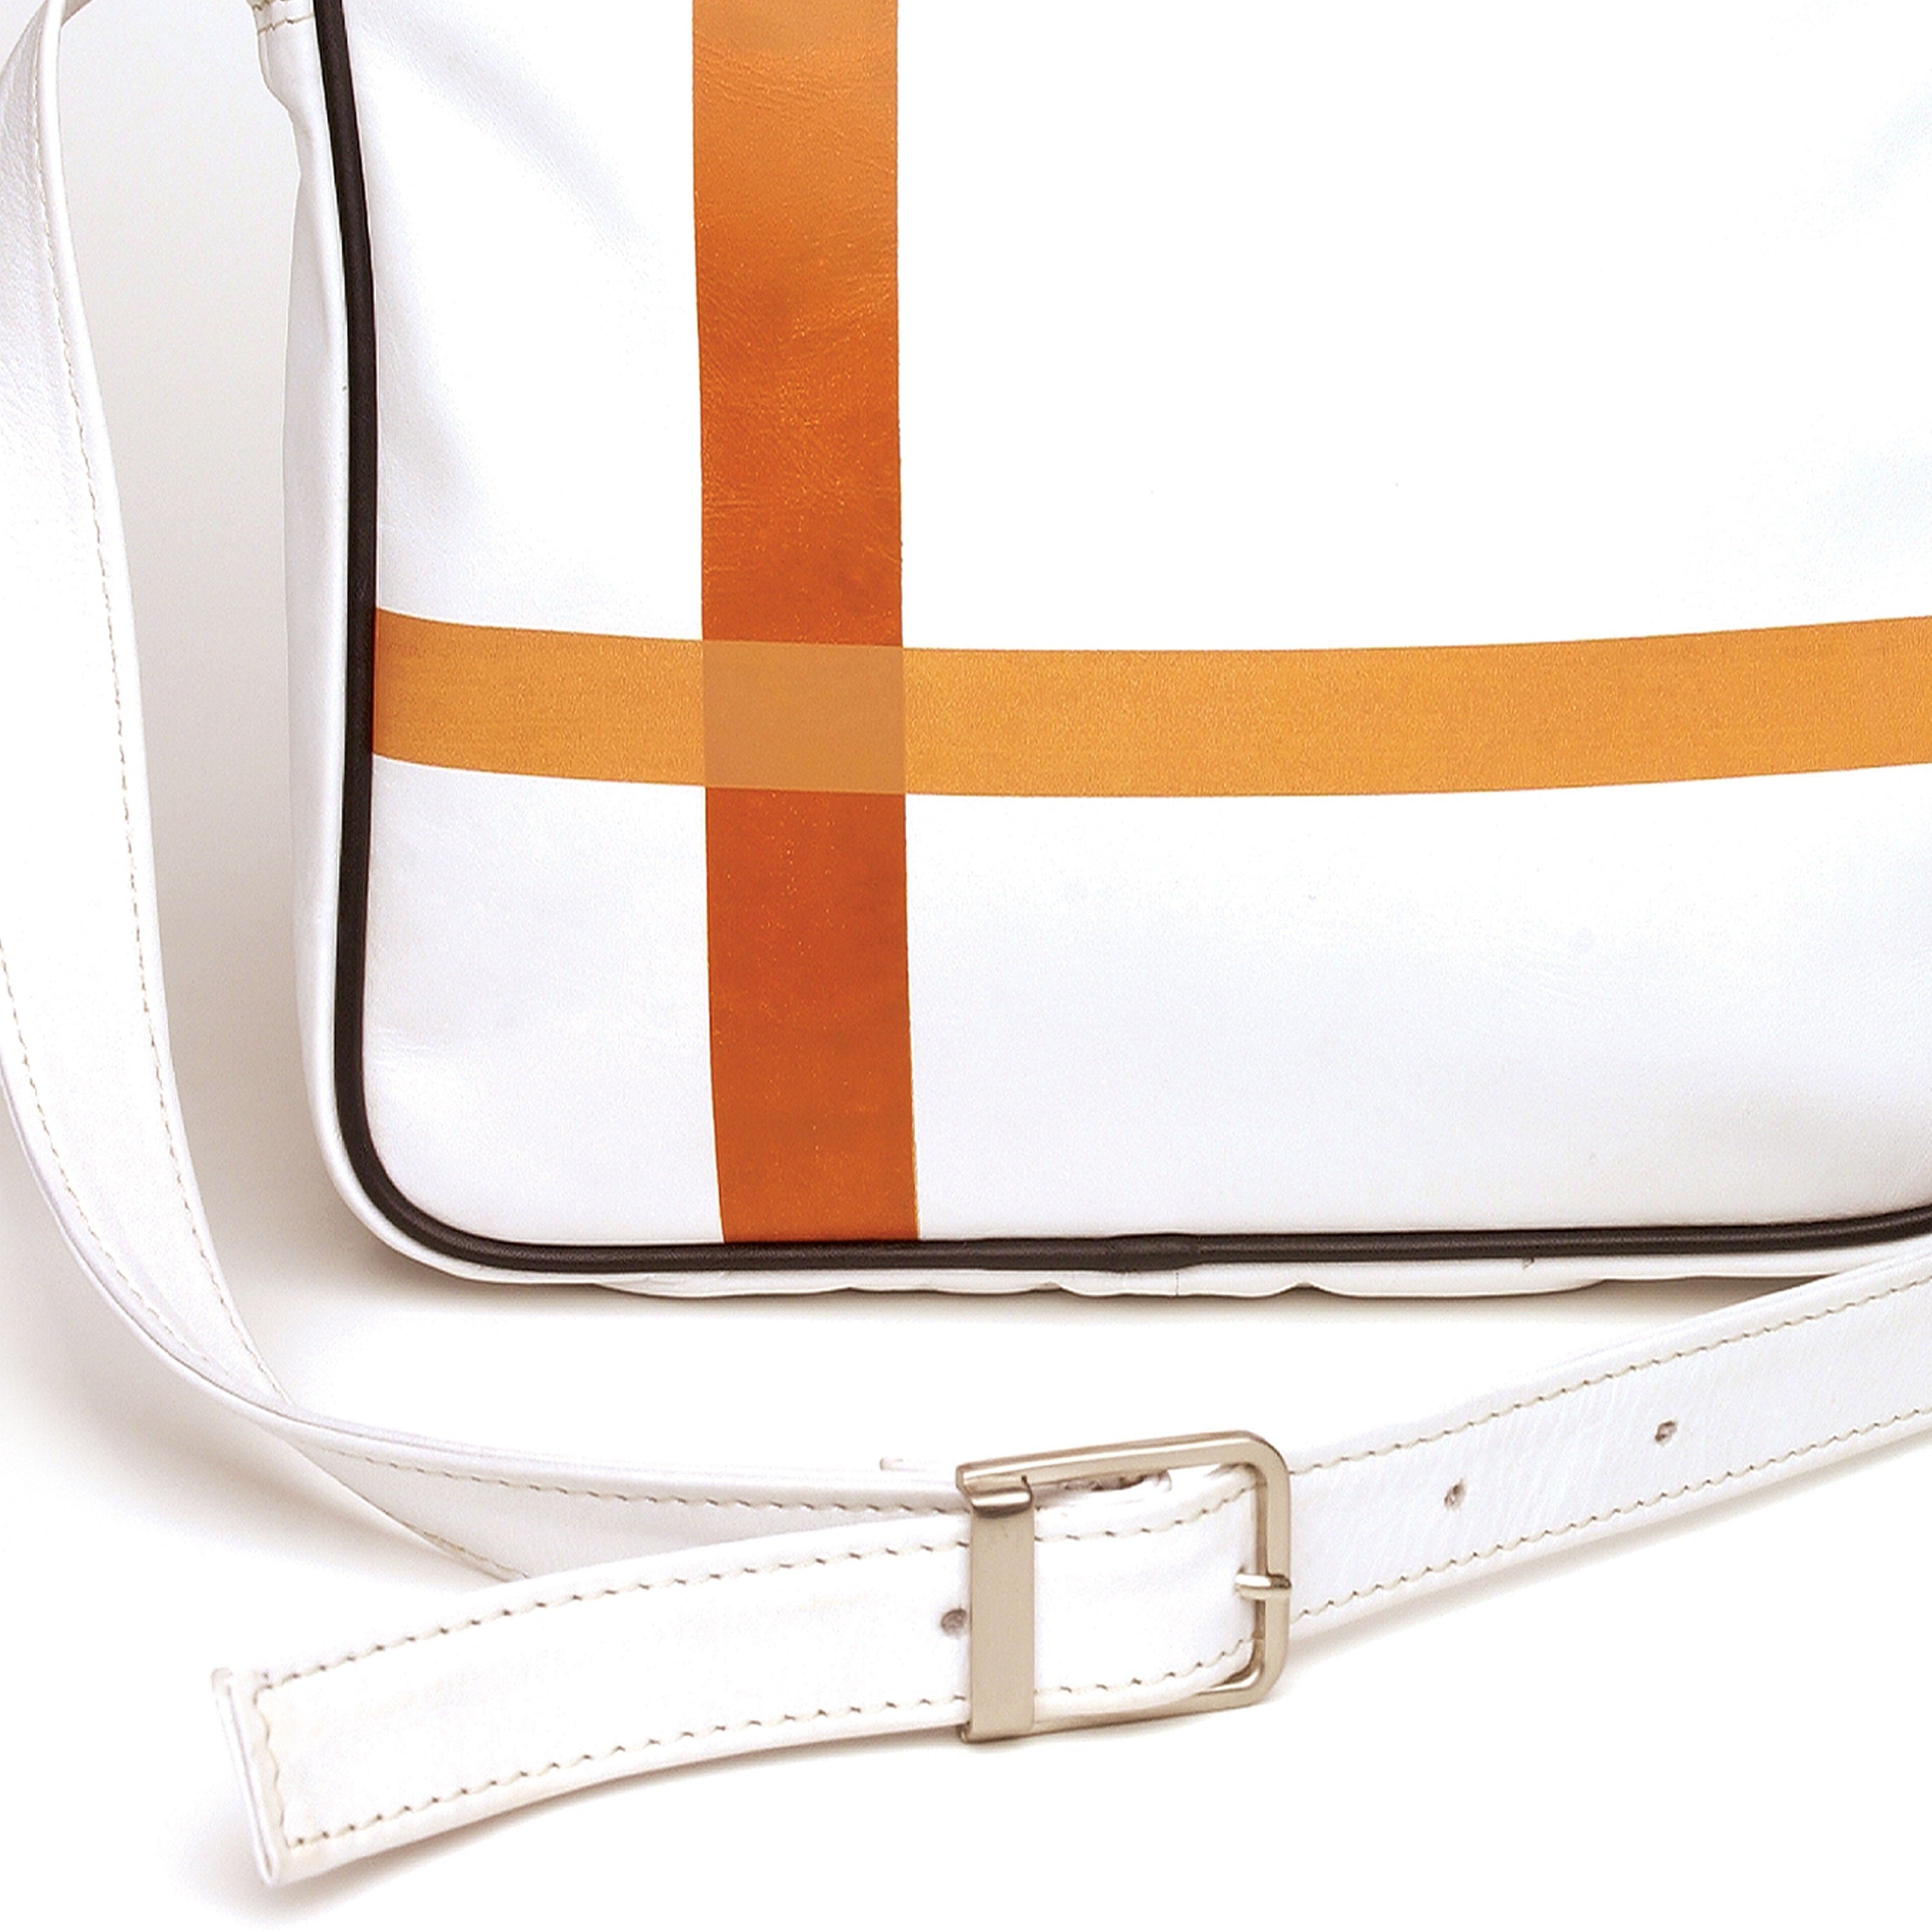 Detail view: Square medium cross body bag, white coil zip closure, all white lightly distressed leather with two toned orange silkscreen off-center cross, black piping. Silver buckle on adjustable cross body strap. Upcycled, sustainable.